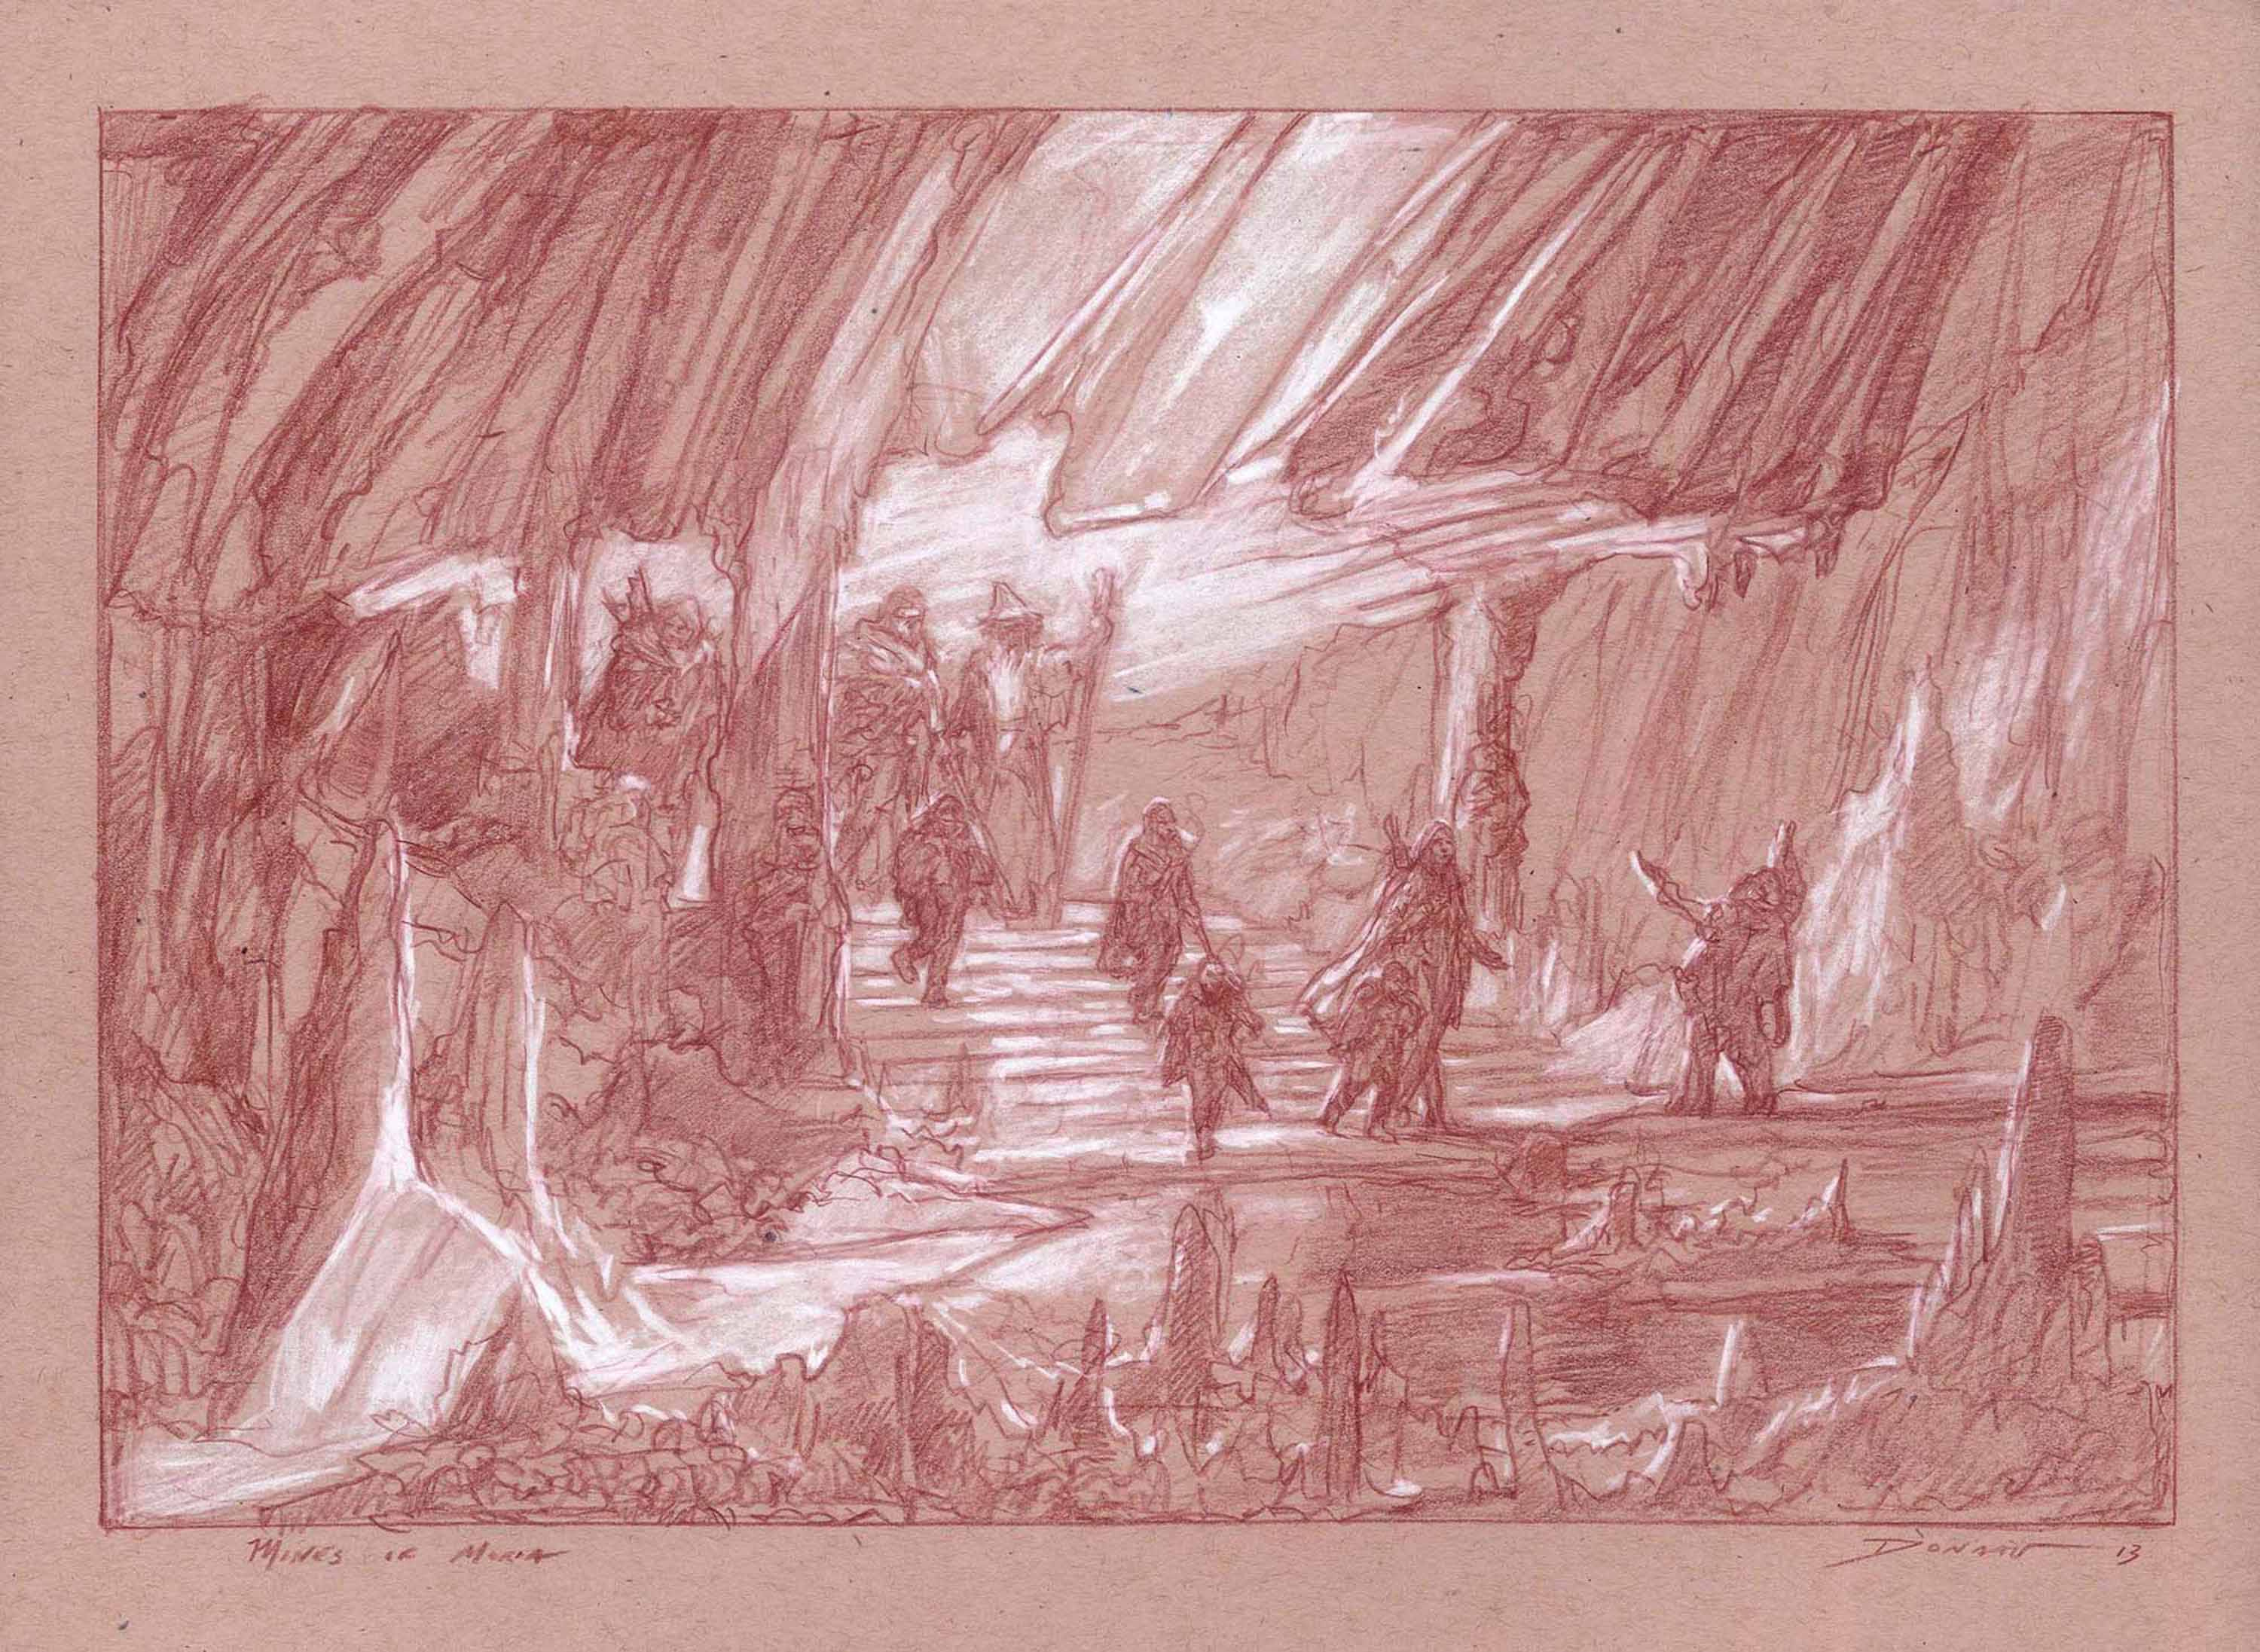 The Fellowship - Crystal Chamber
14" x11"  Watercolor Pencil and Chalk on Toned paper 2013
private collection